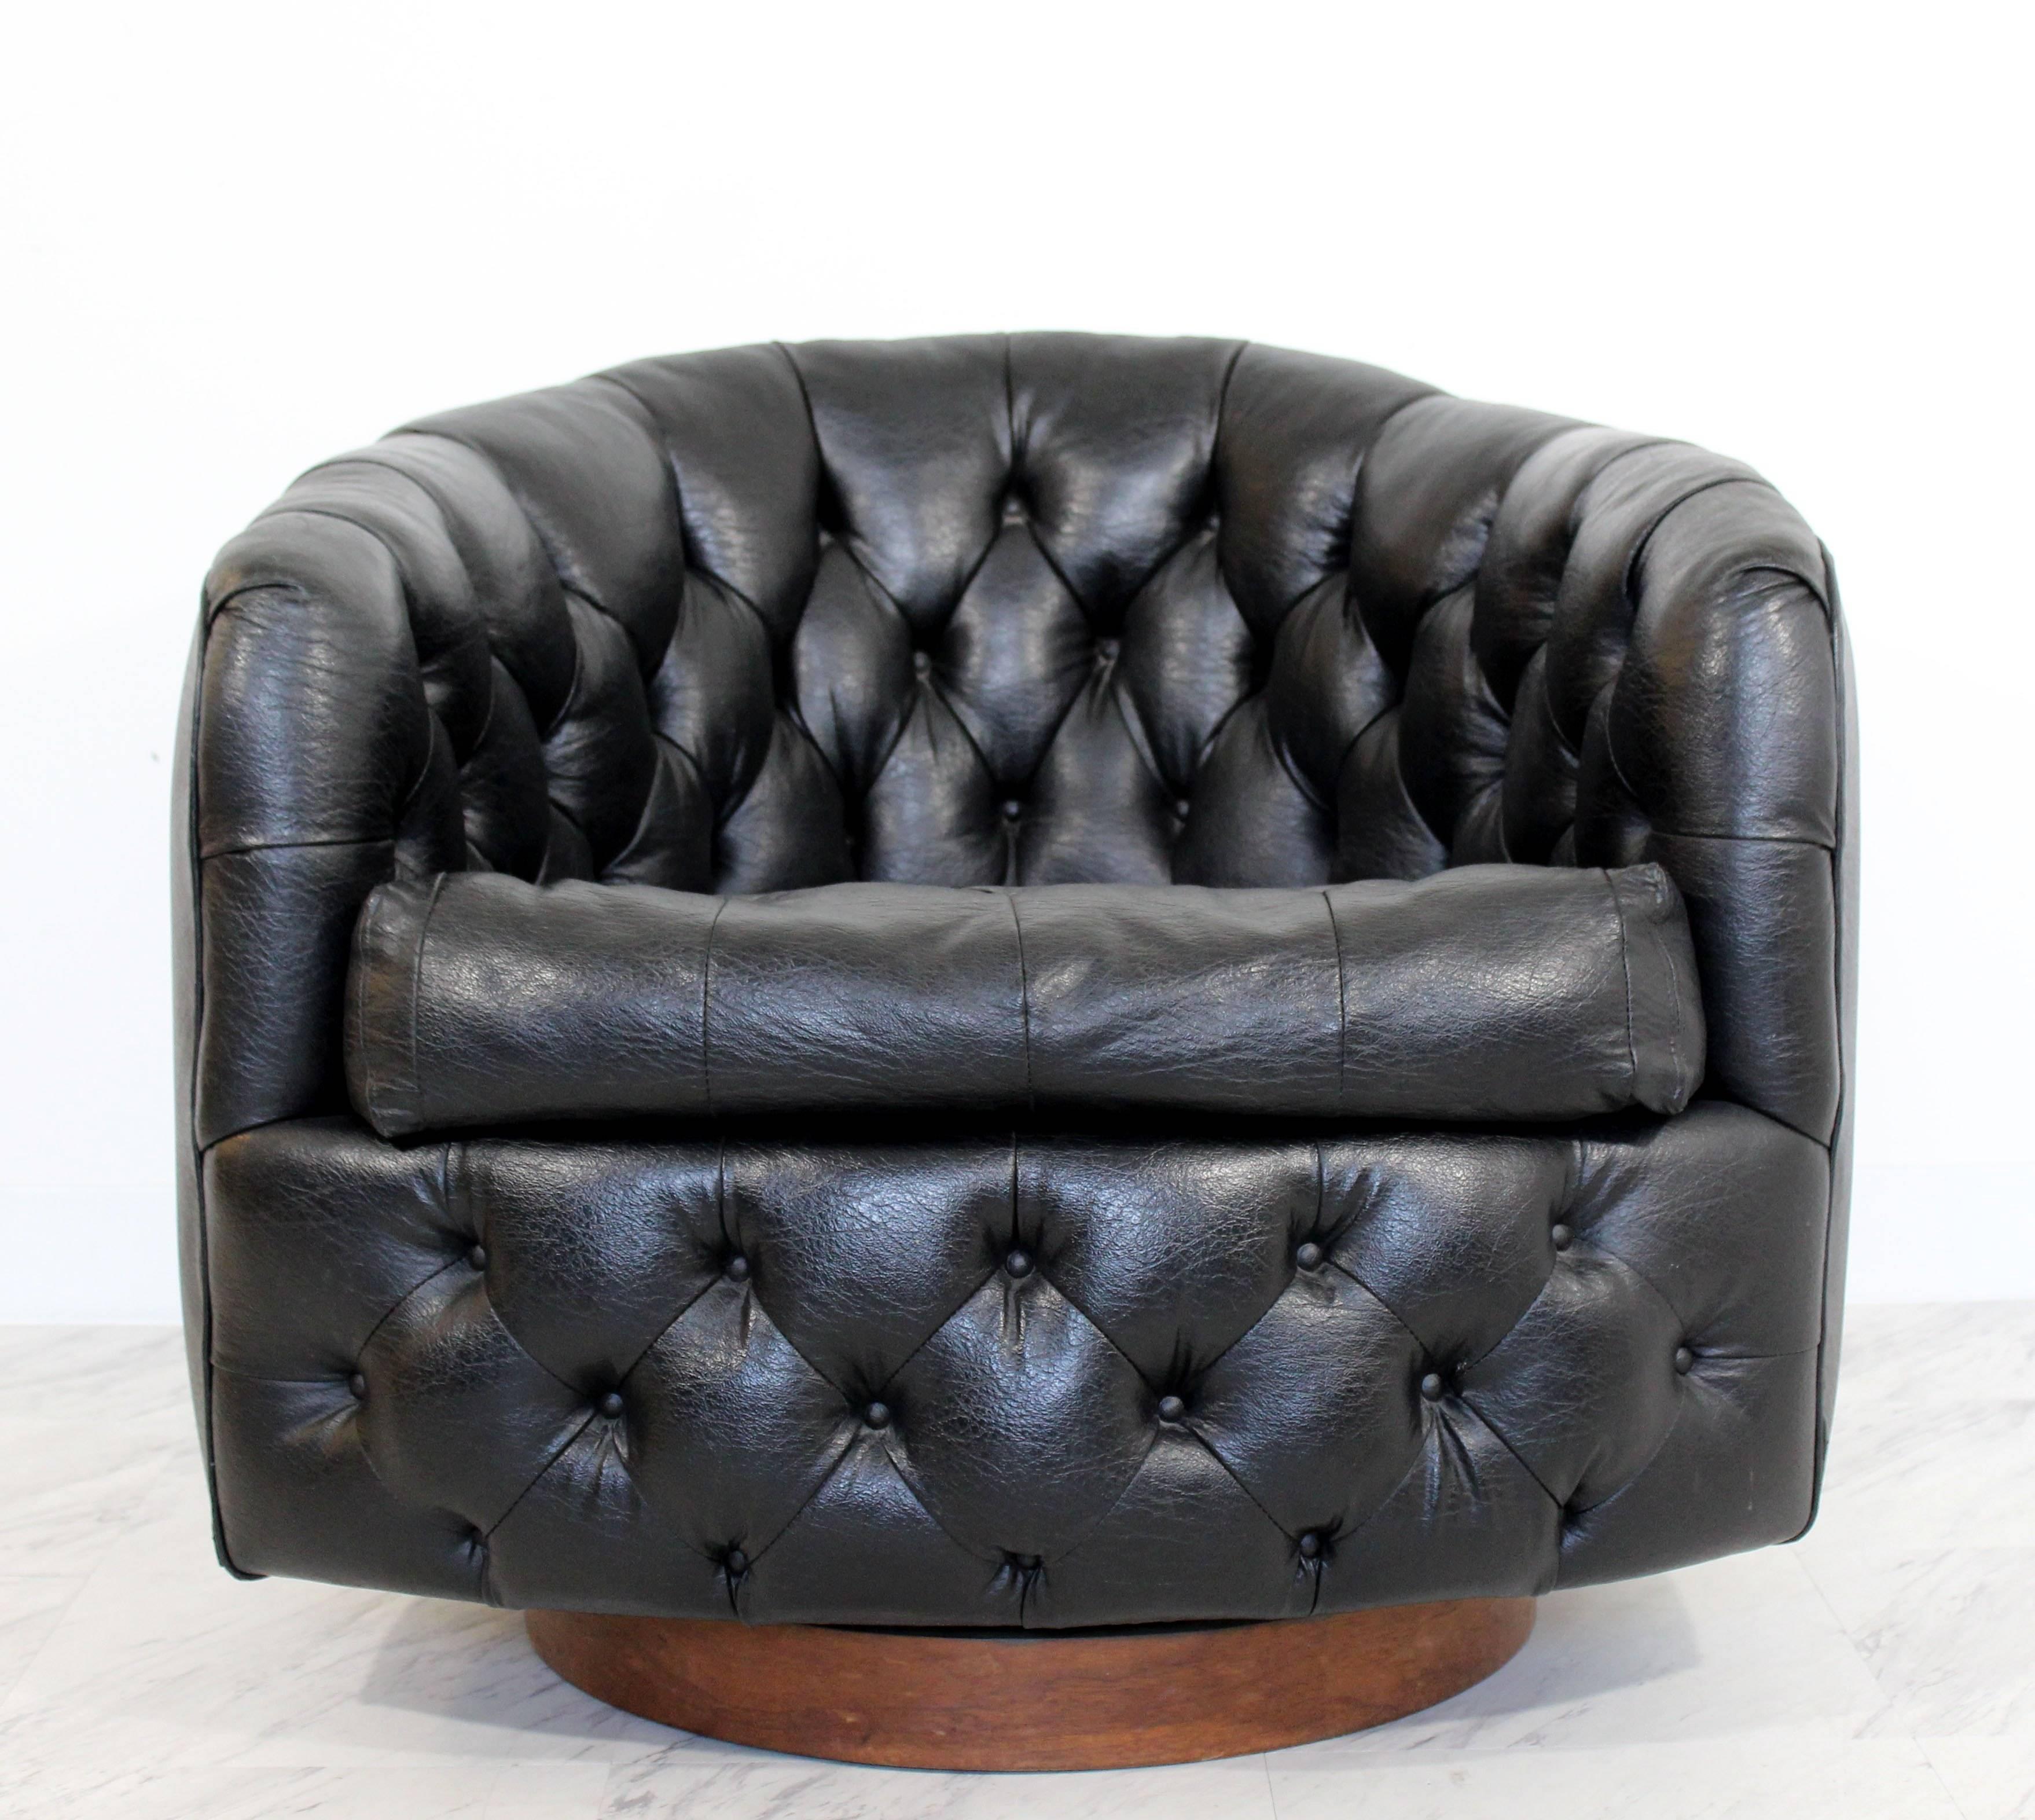 For your consideration is a gorgeous, tufted, black leather, barrel back, swivel lounge chair, on walnut swivel base, by Milo Baughman, circa 1960s. In excellent condition. The dimensions are 30